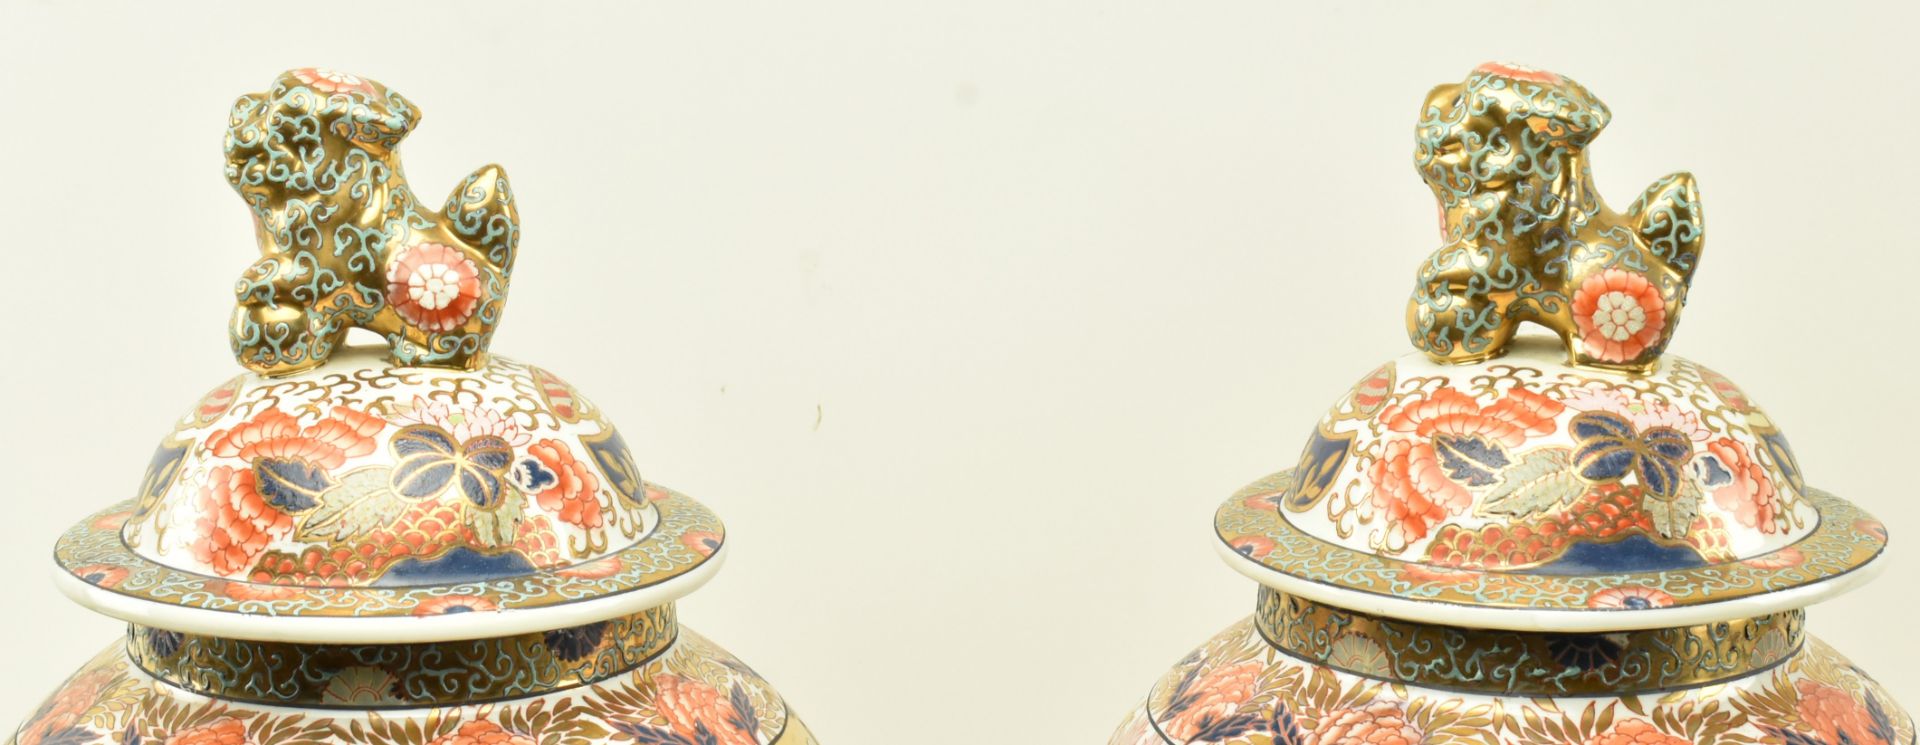 PAIR OF ROYAL CROWN DERBY STYLE LIDDED BALUSTER VASES - Image 2 of 6